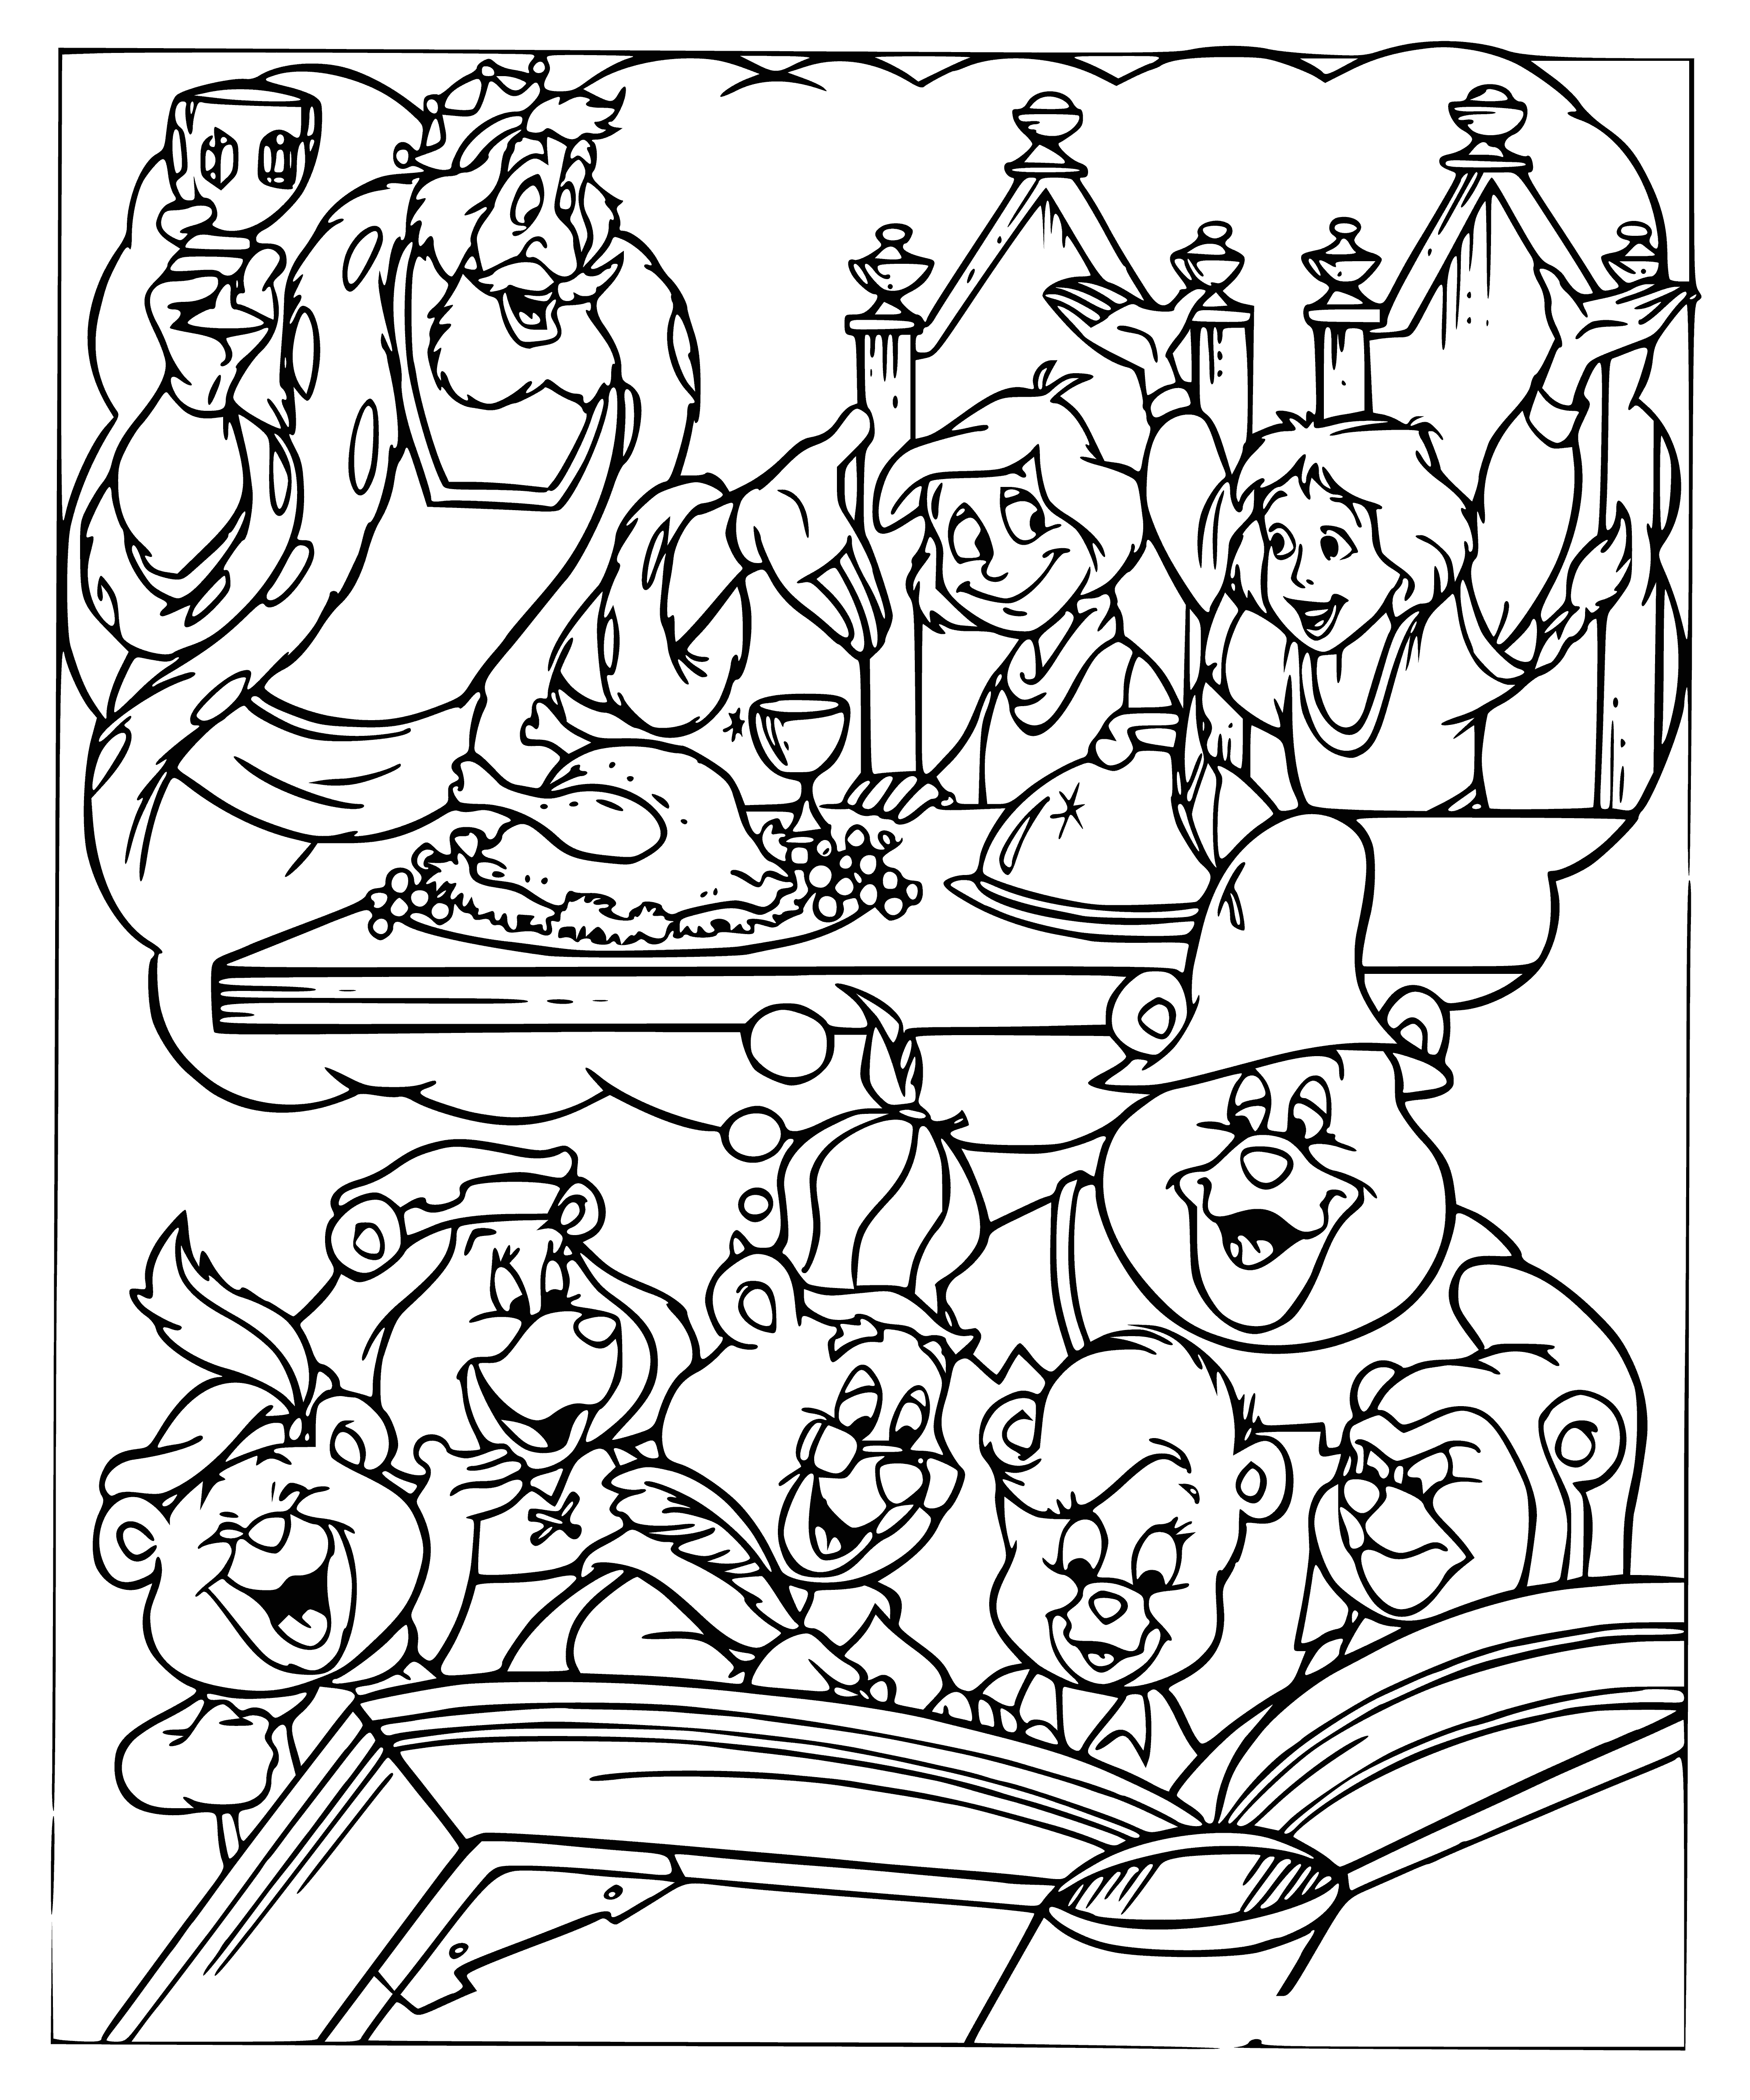 coloring page: The book of fairy tales features three Gummi Bears: a red one with a mouth slightly open as if blowing a bubble, a yellow one with its mouth open wide as if screaming, and a green one with its mouth open in a "O" shape as if laughing.